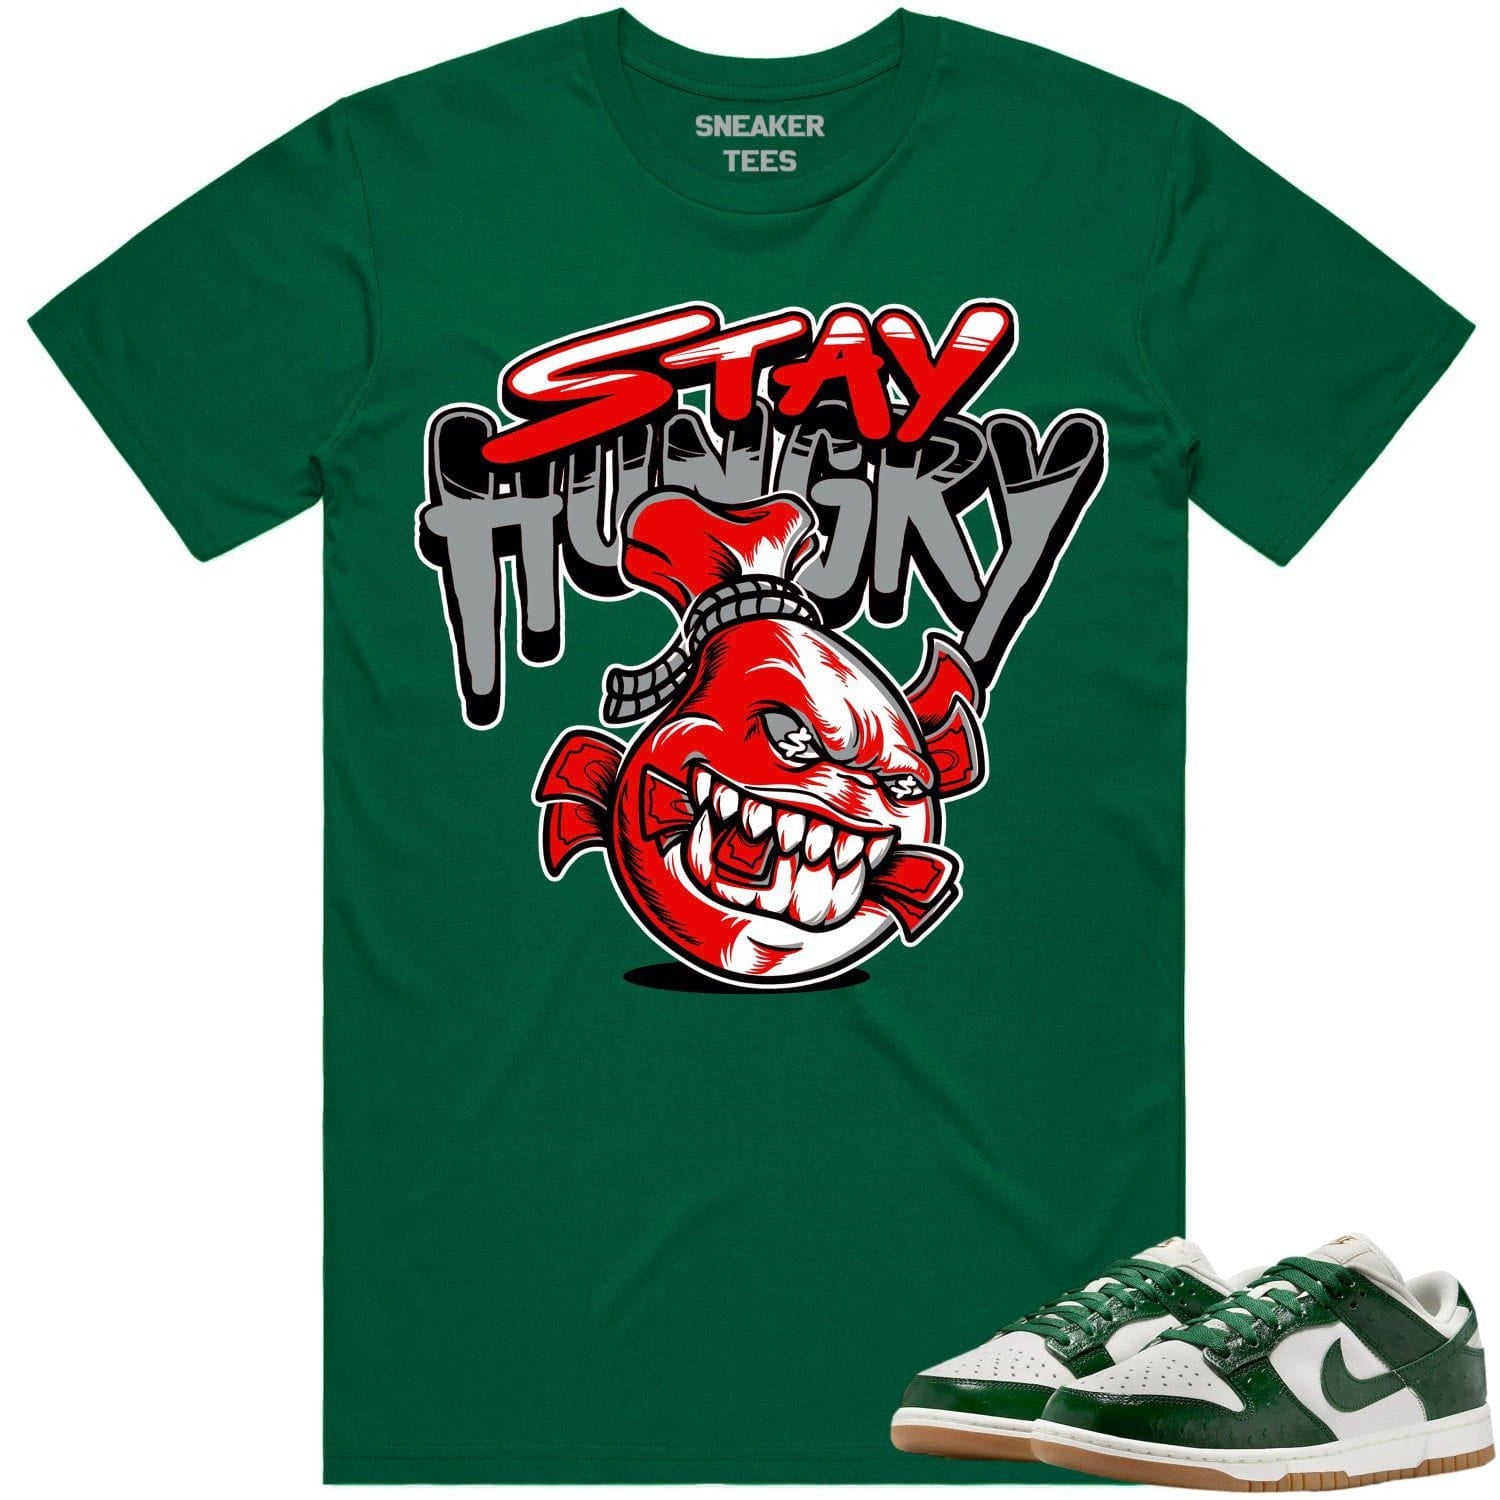 Green Ostrich Dunks Shirt - Dunks Sneaker Tees - Red Stay Hungry